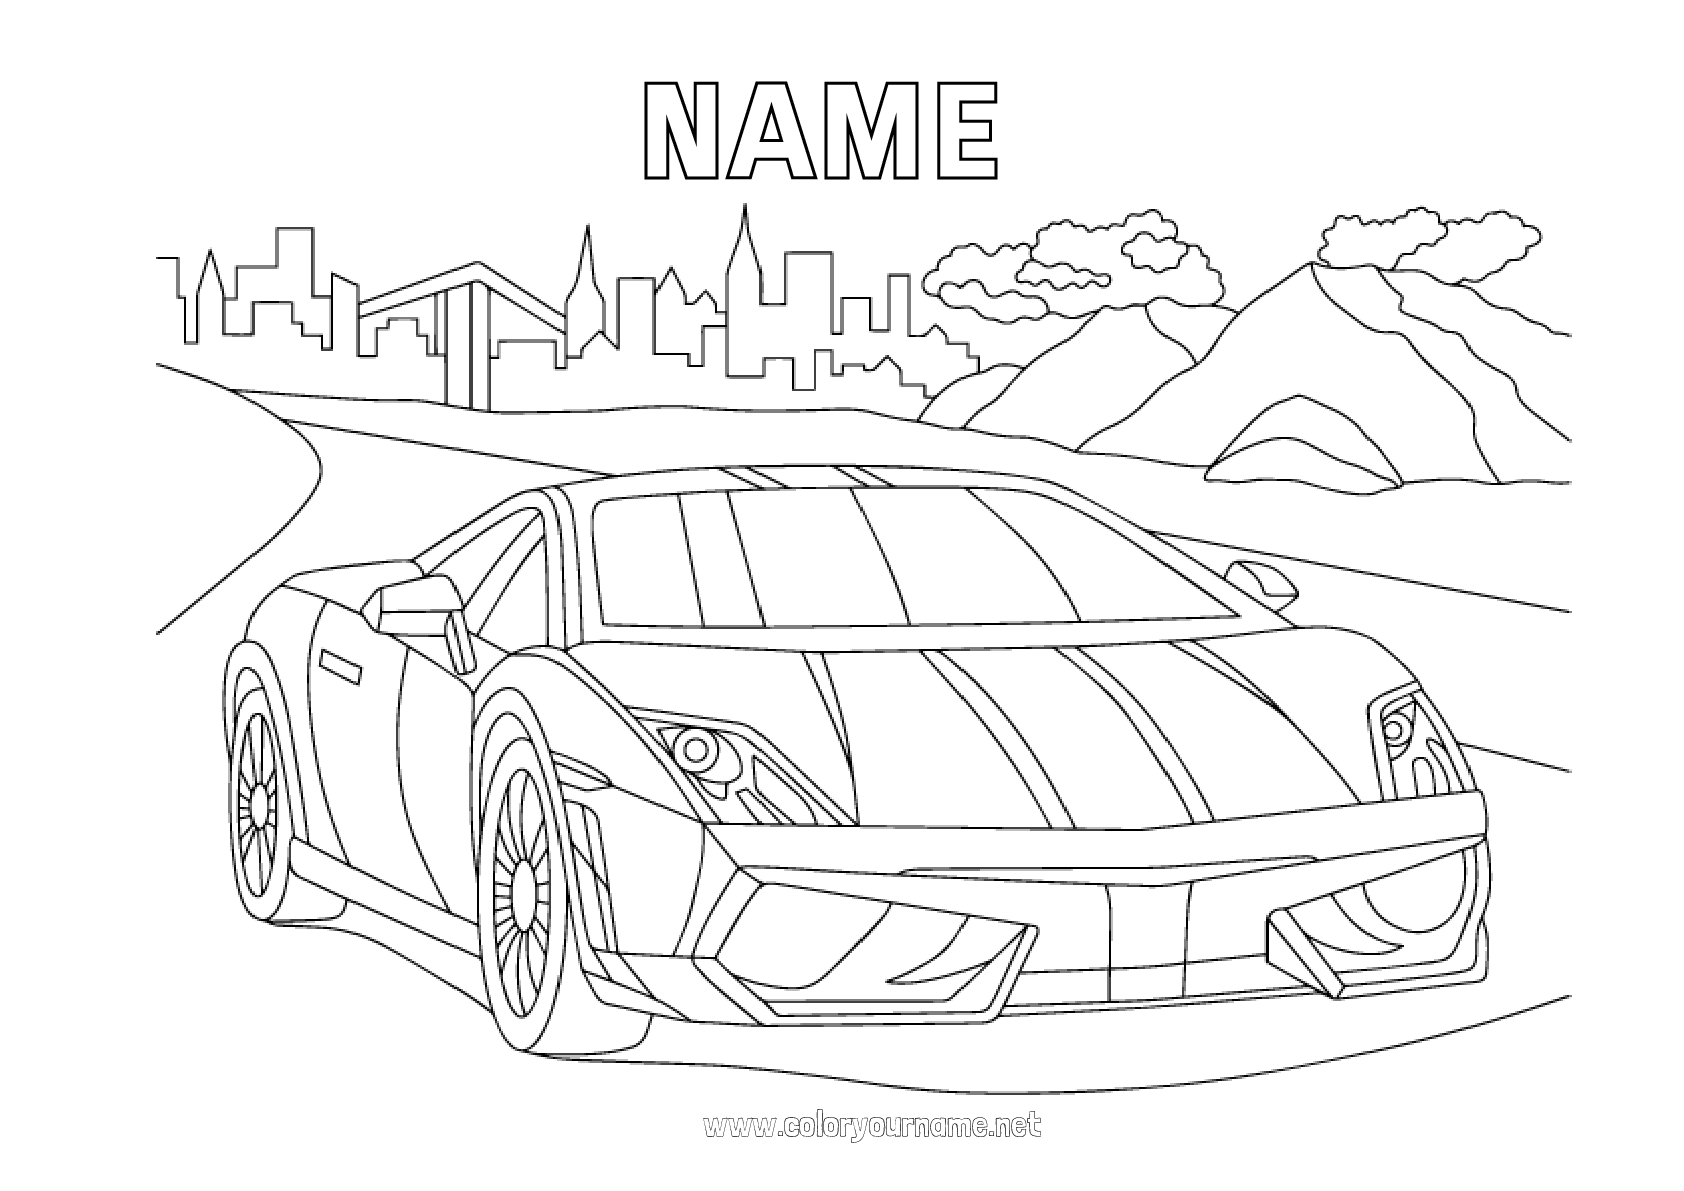 Coloriage n°343 - Véhicules Voiture Course